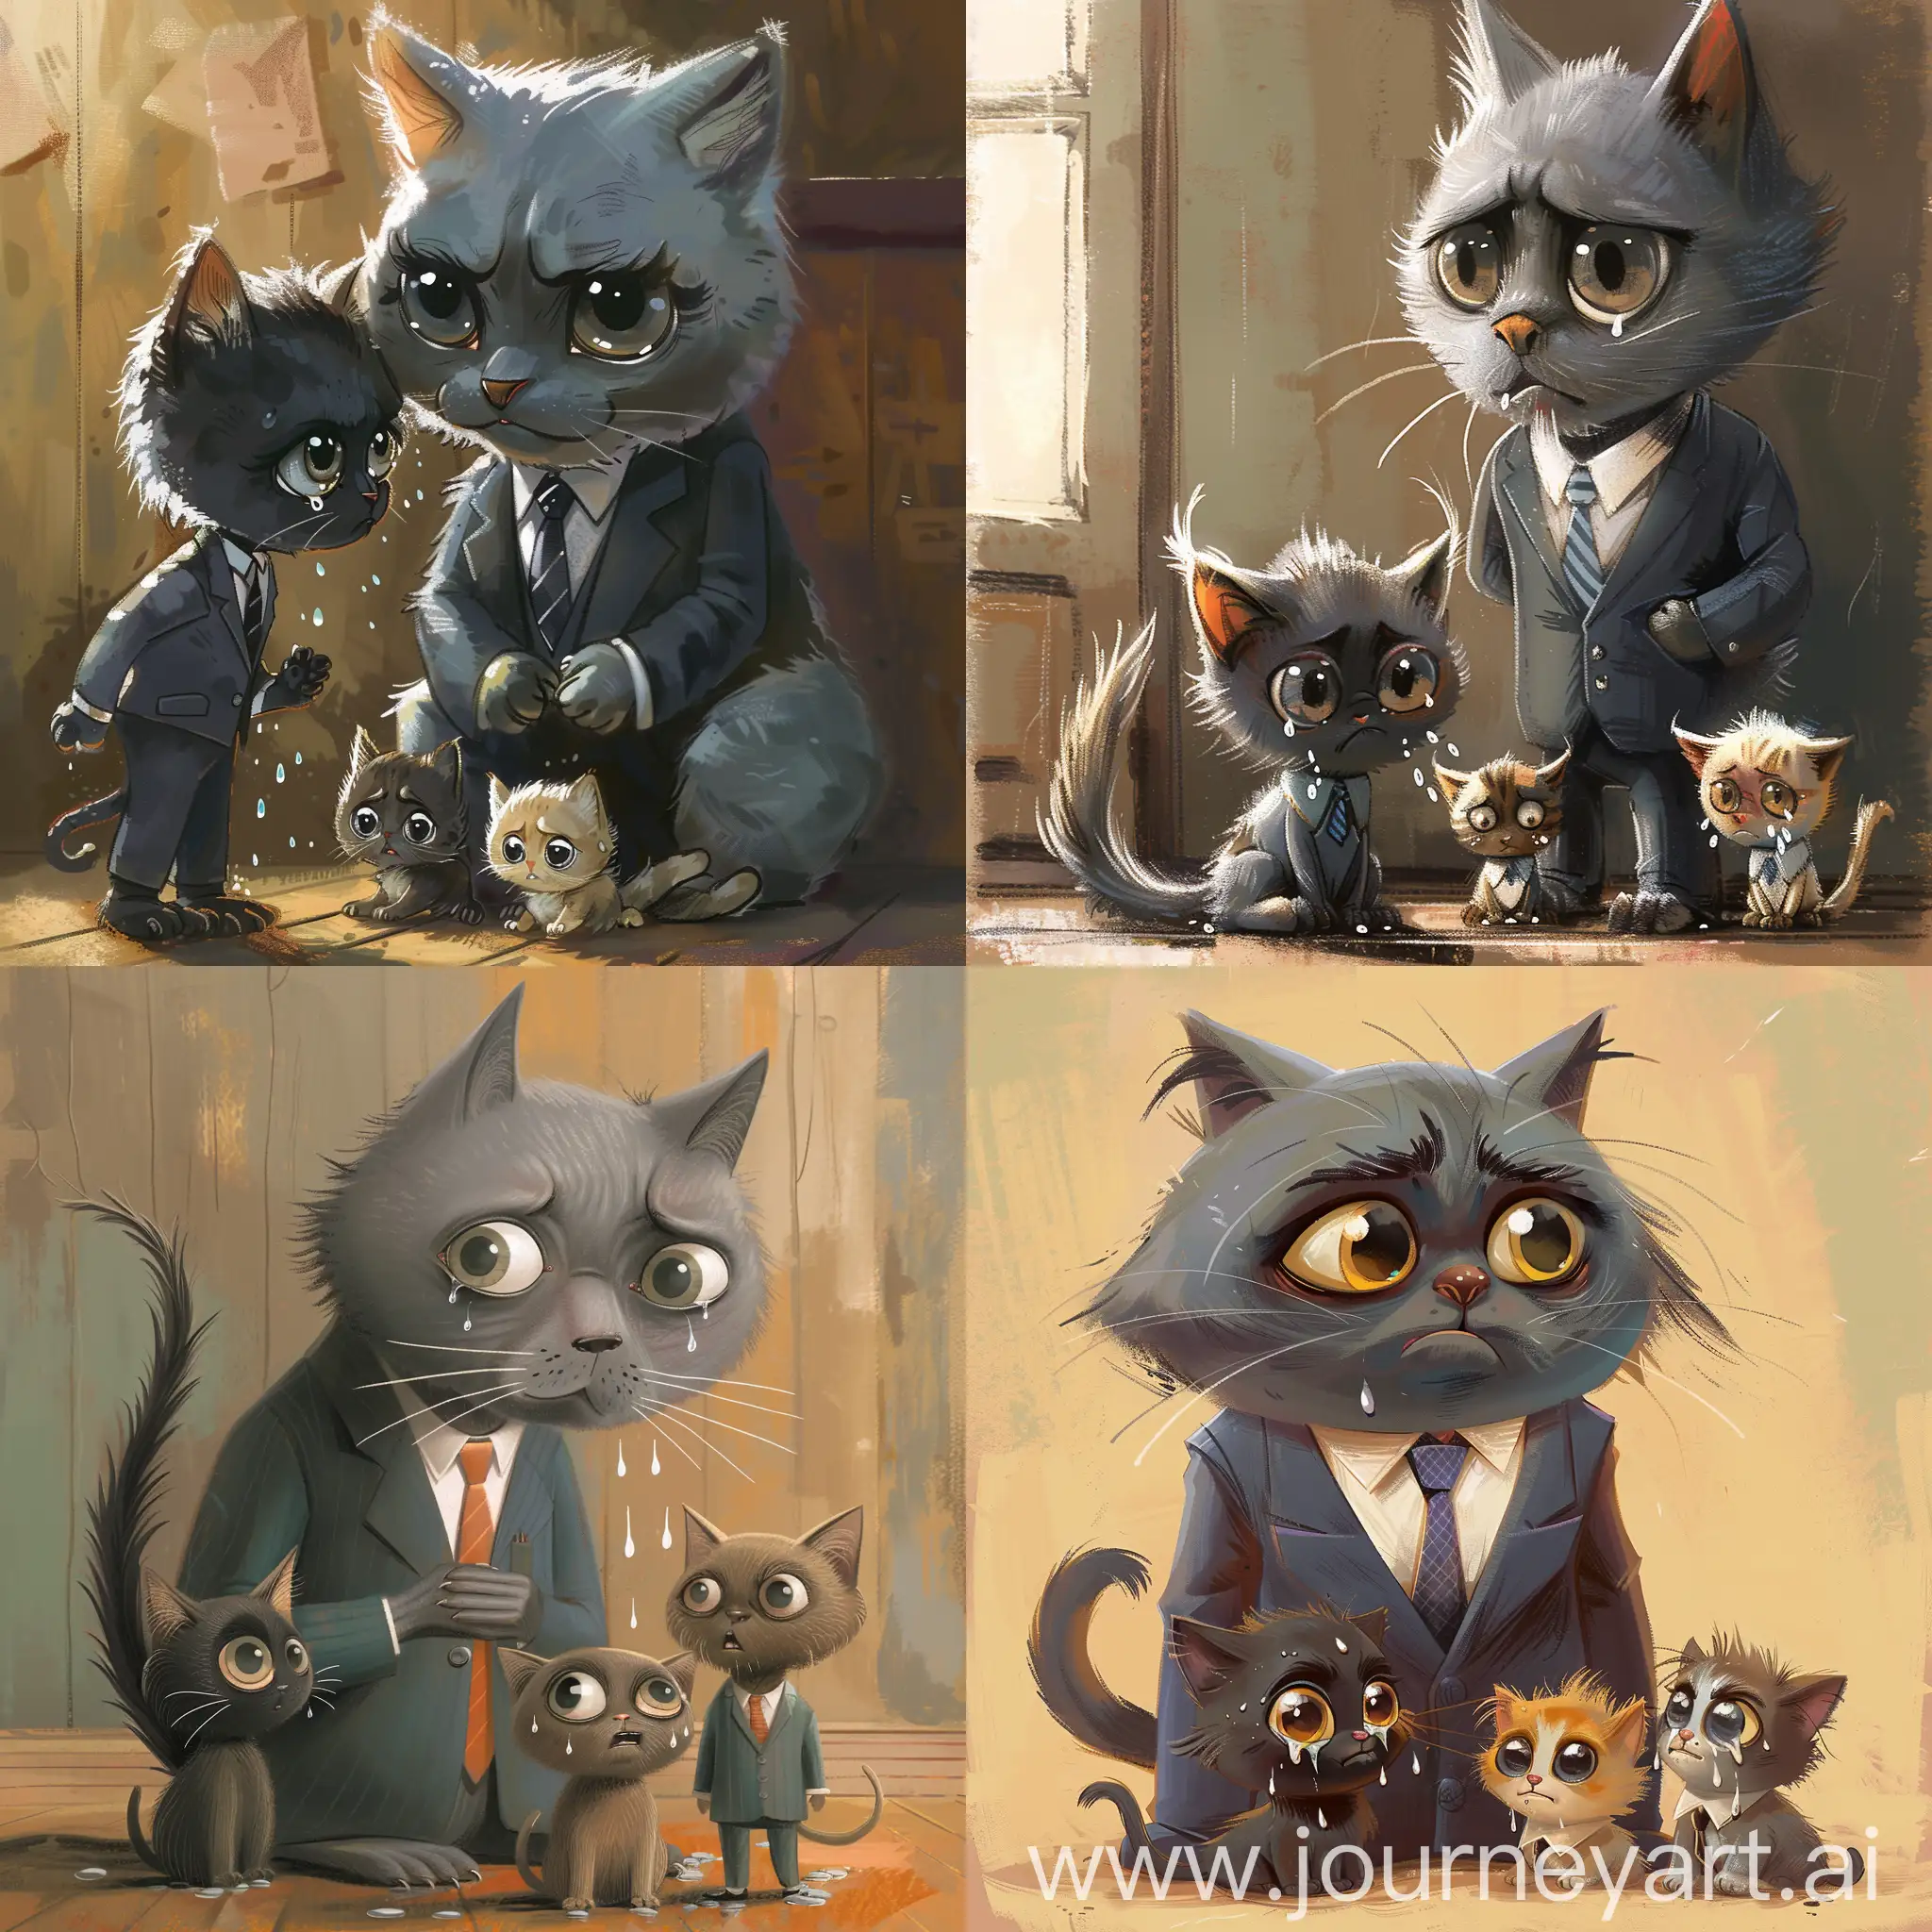 a large gray cat in a business suit and tie scolds three little kittens. Kittens have big eyes and tears flow from them.
one kitten is black, the second kitten is brown, and the third kitten is blond. setting, location: school